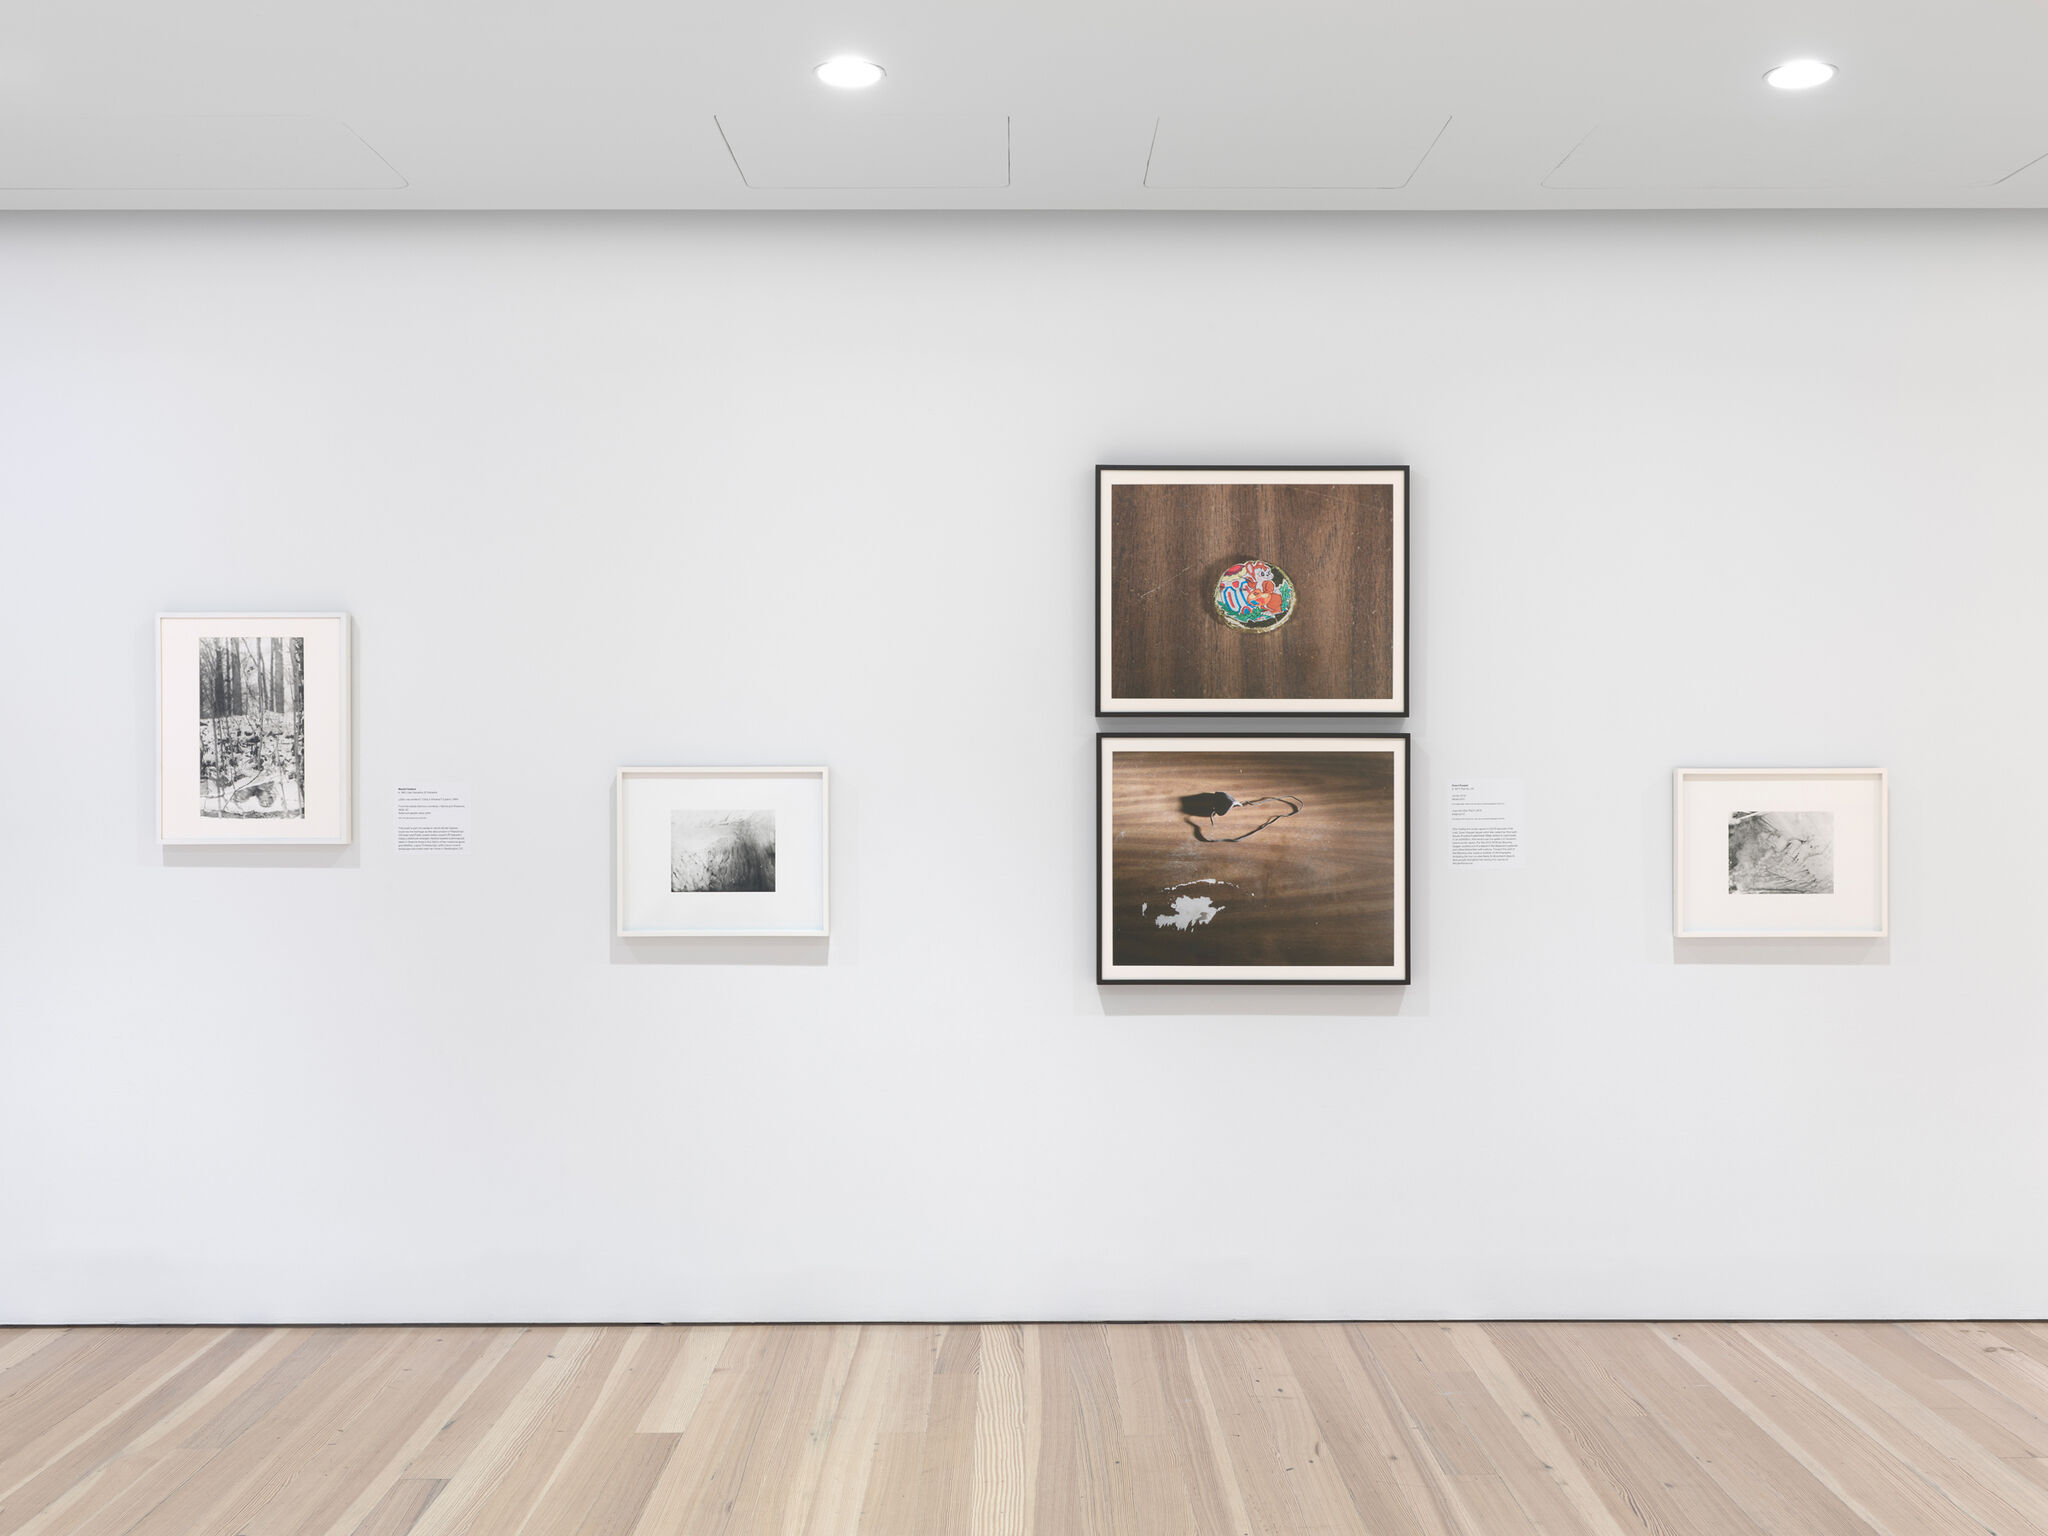 Artworks in a light-filled gallery.